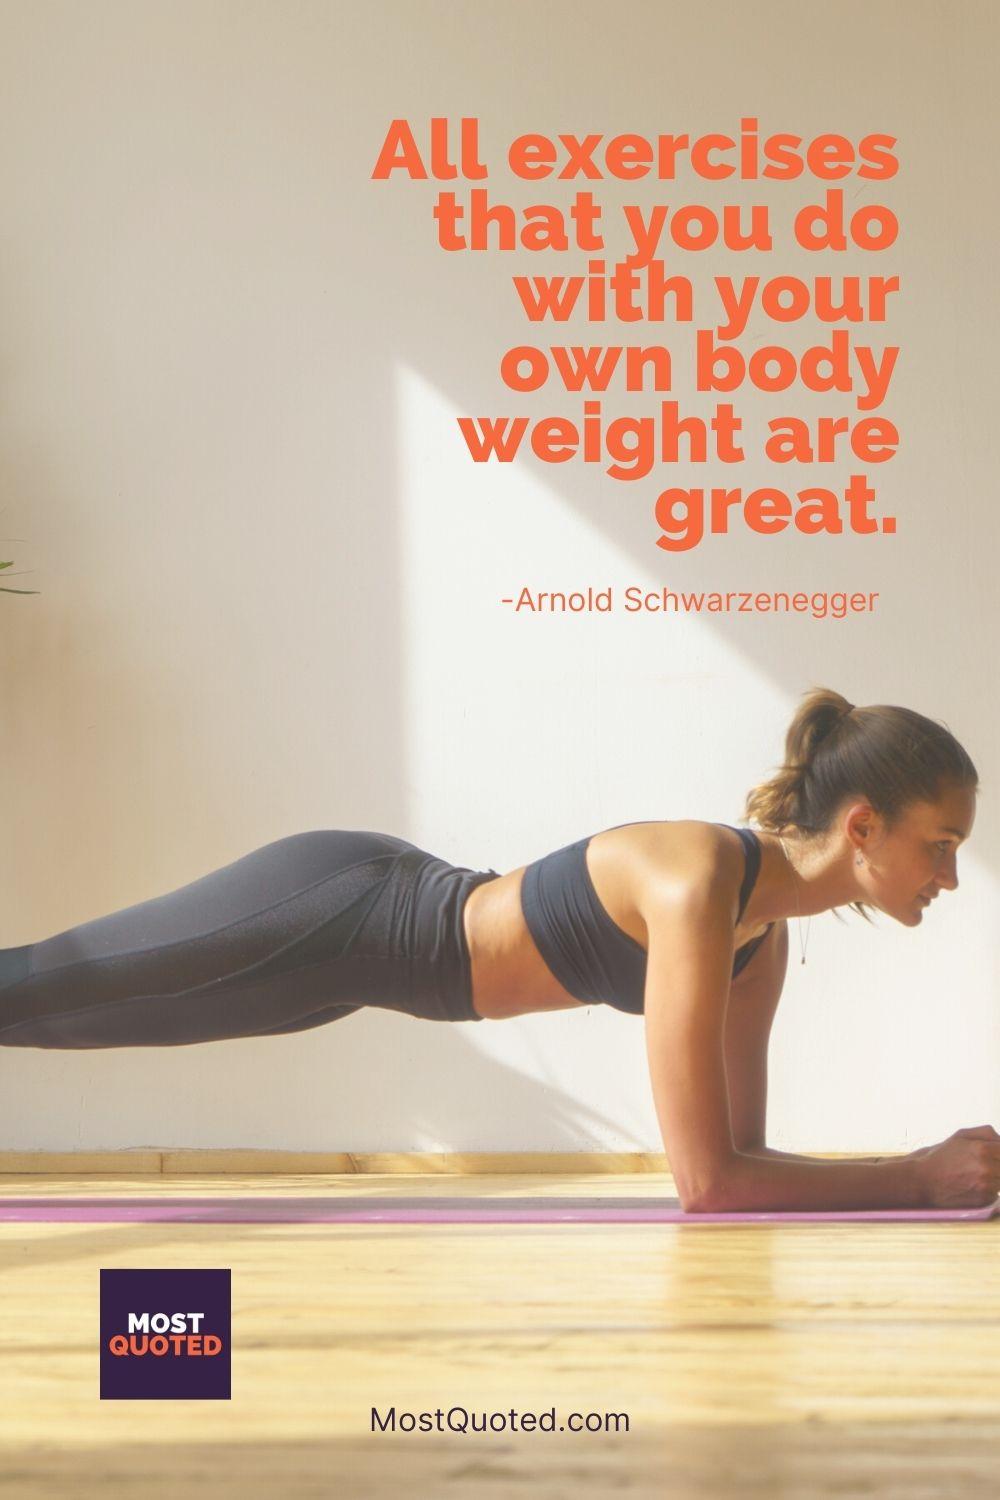 All exercises that you do with your own body weight are great. - Arnold Schwarzenegger